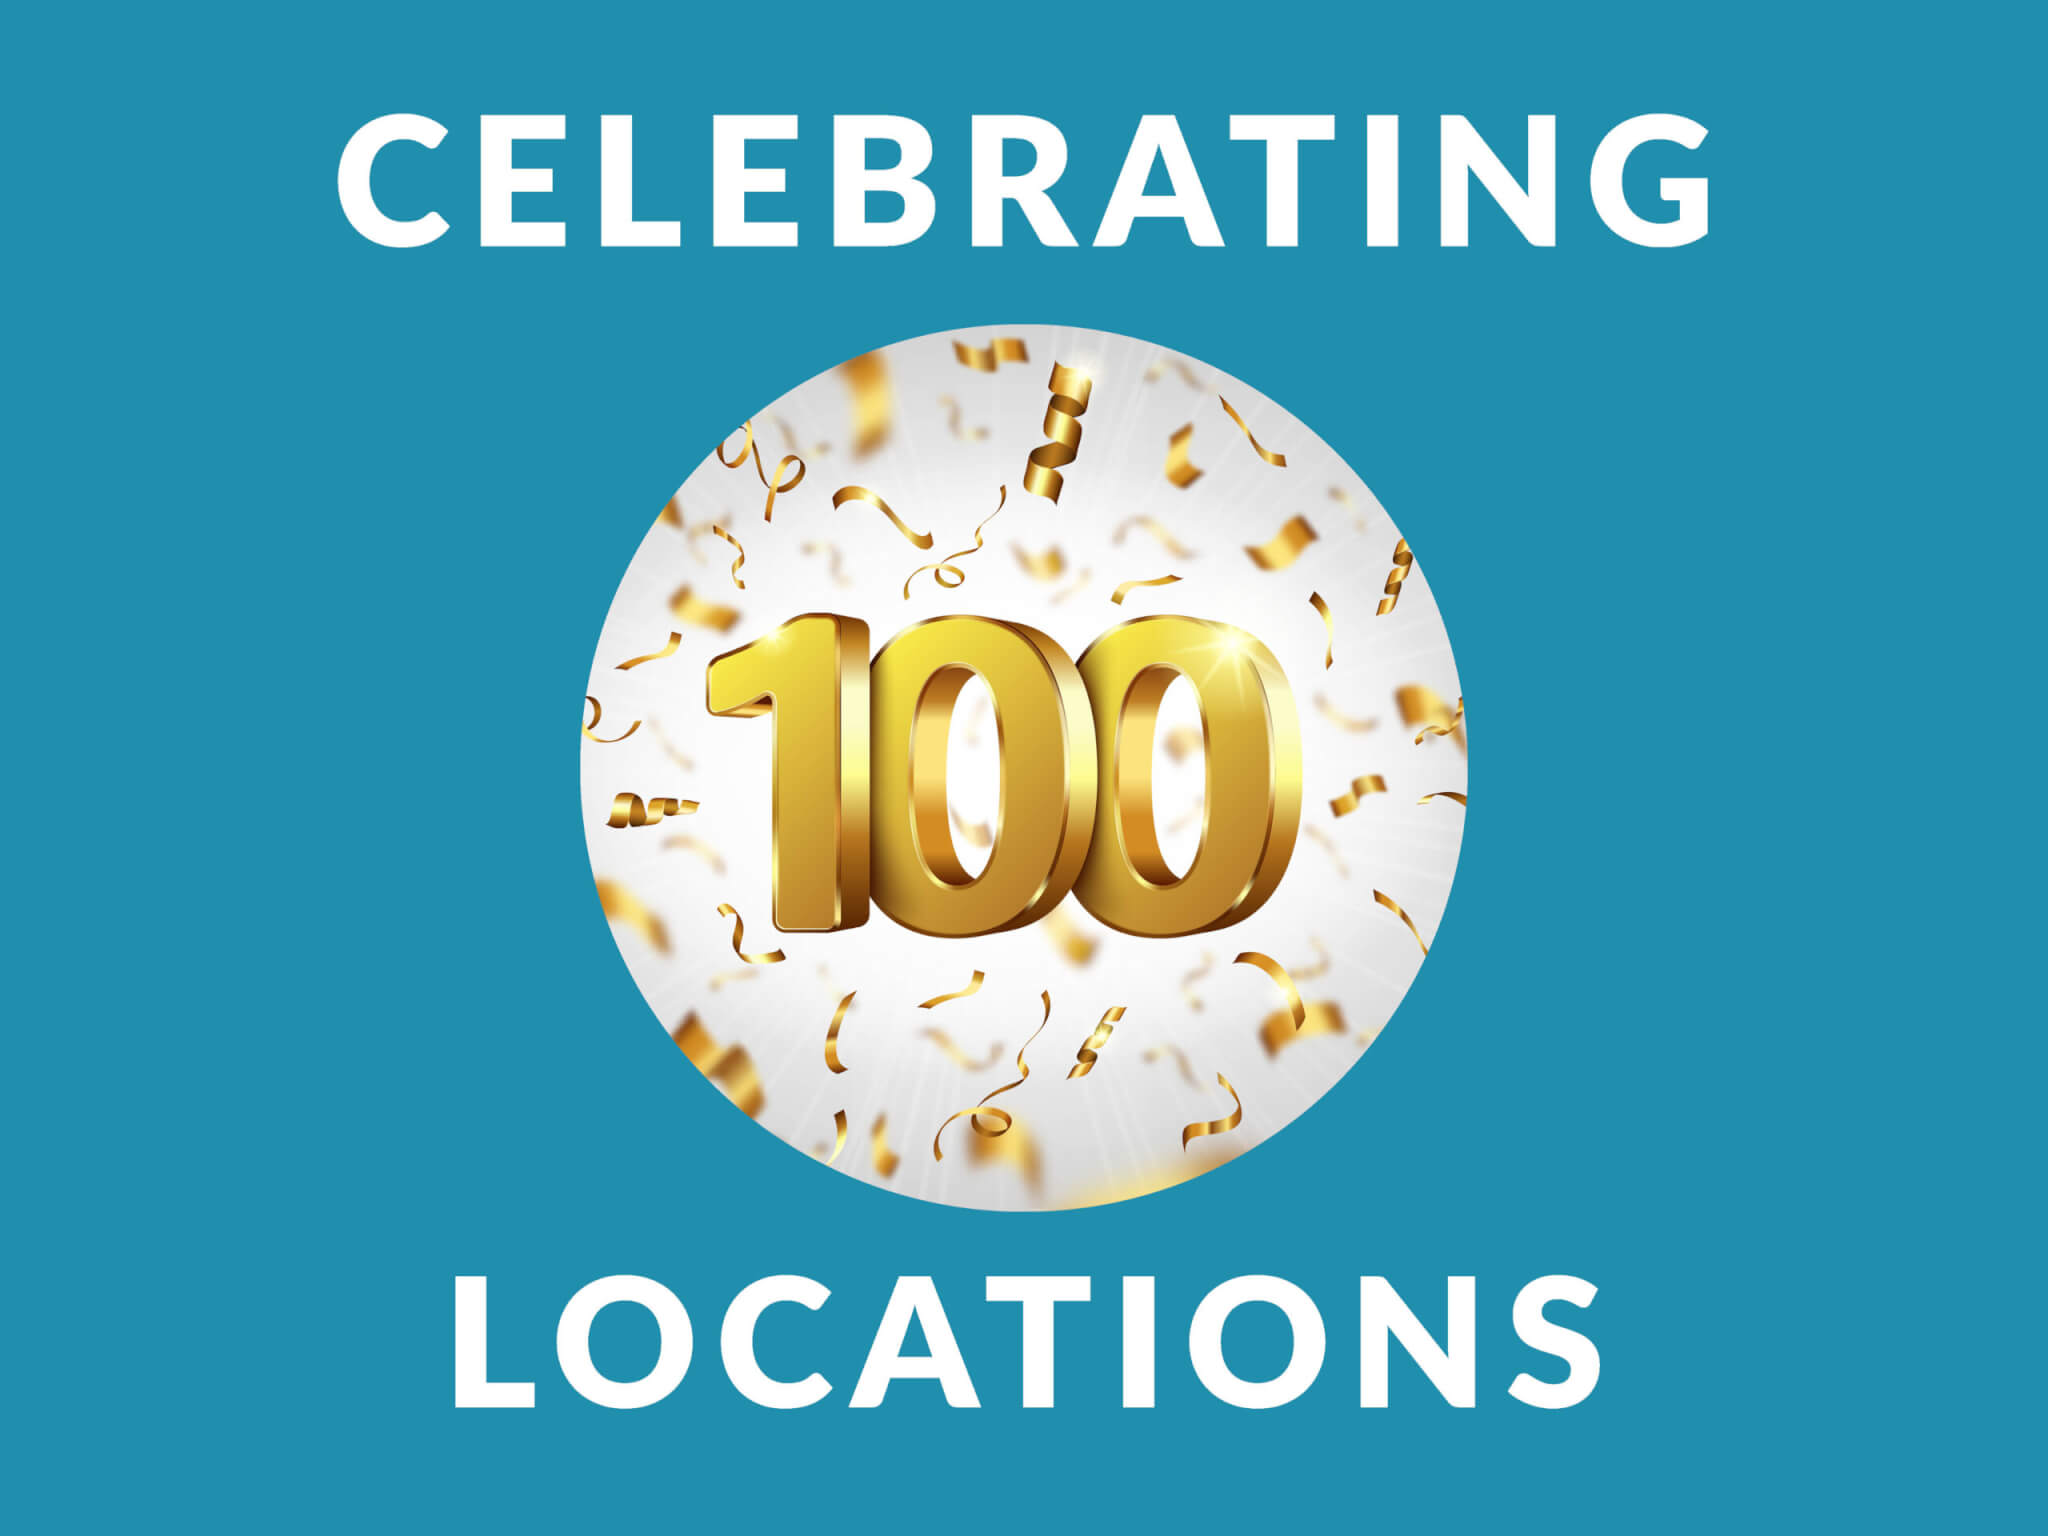 U.S. Dermatology Partners Celebrates Milestone Opening of 100th Location as Part of Their Outreach Program